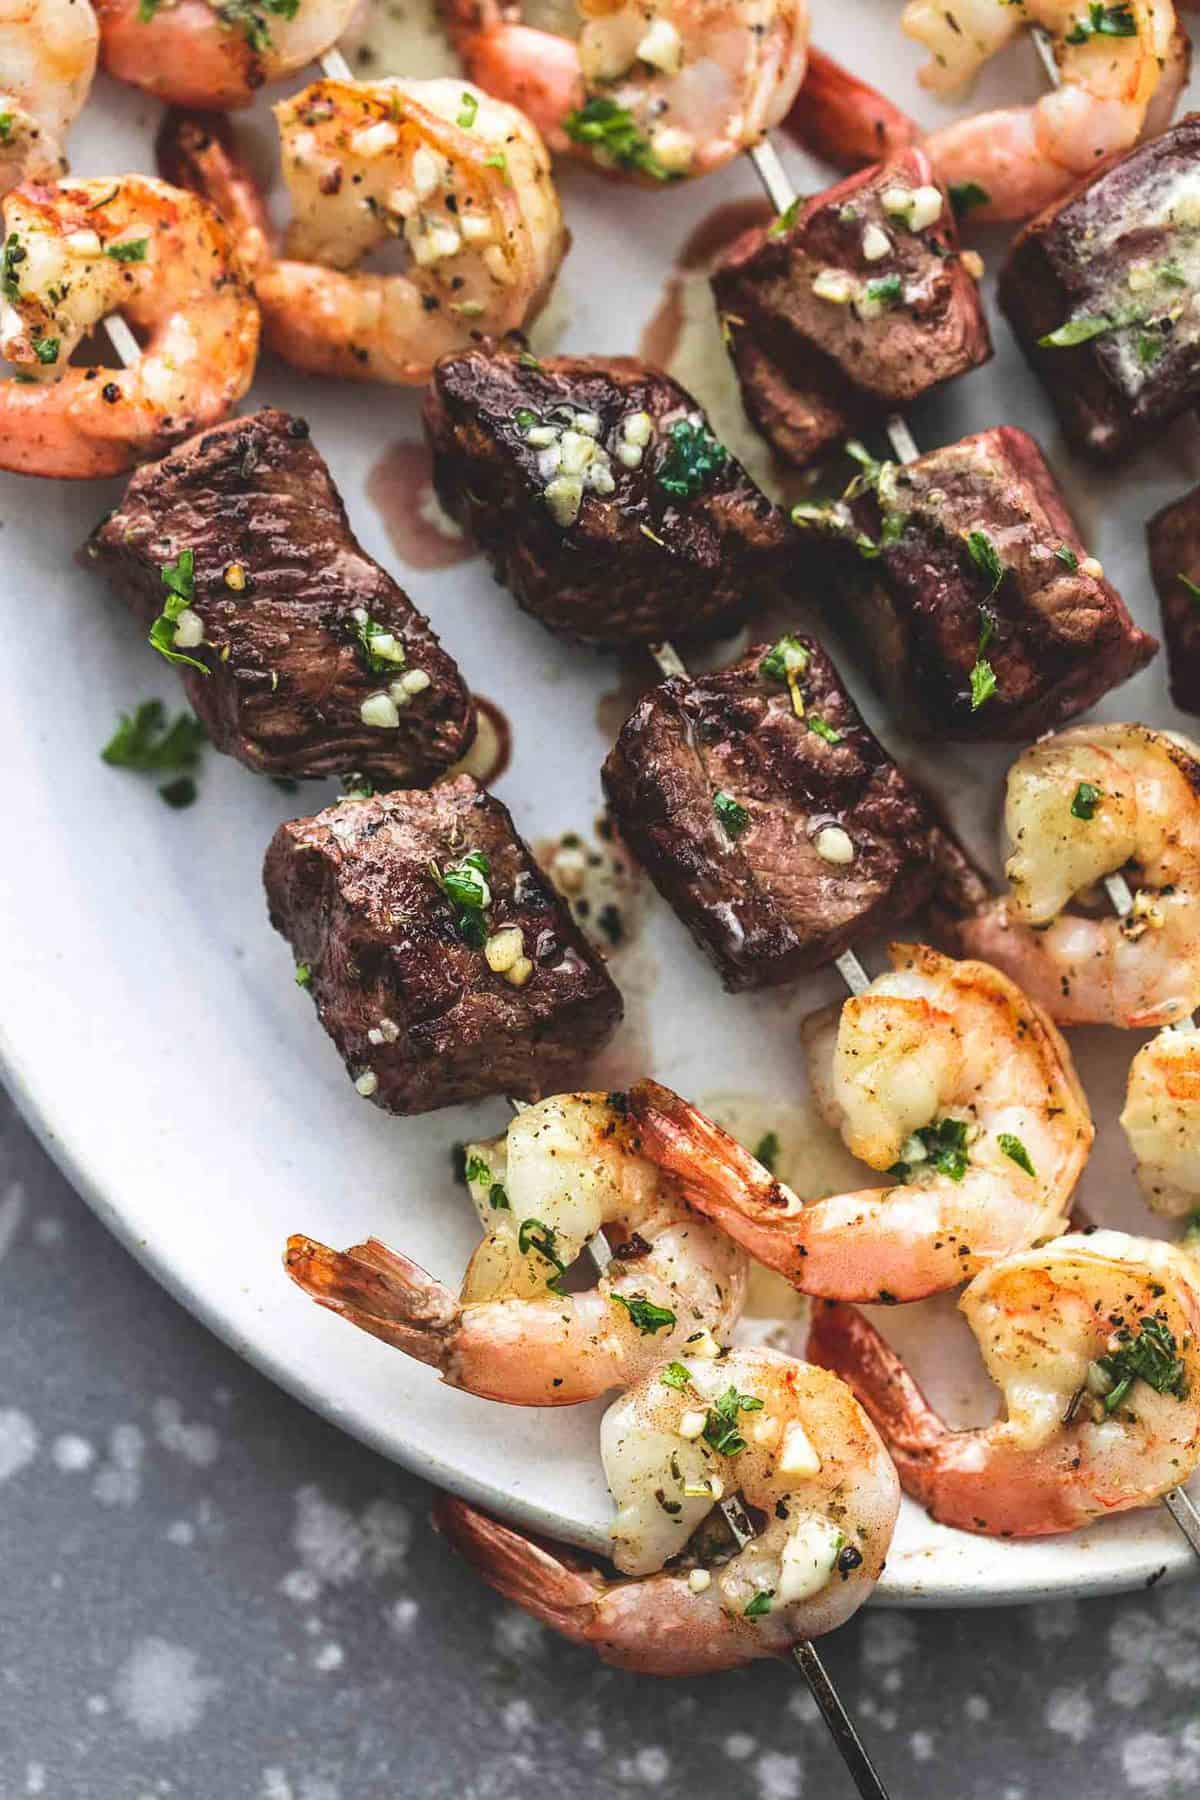 Garlic Butter Surf And Turf Kabobs Steak And Shrimp Creme De La Crumb,Puppy Eyes Cute